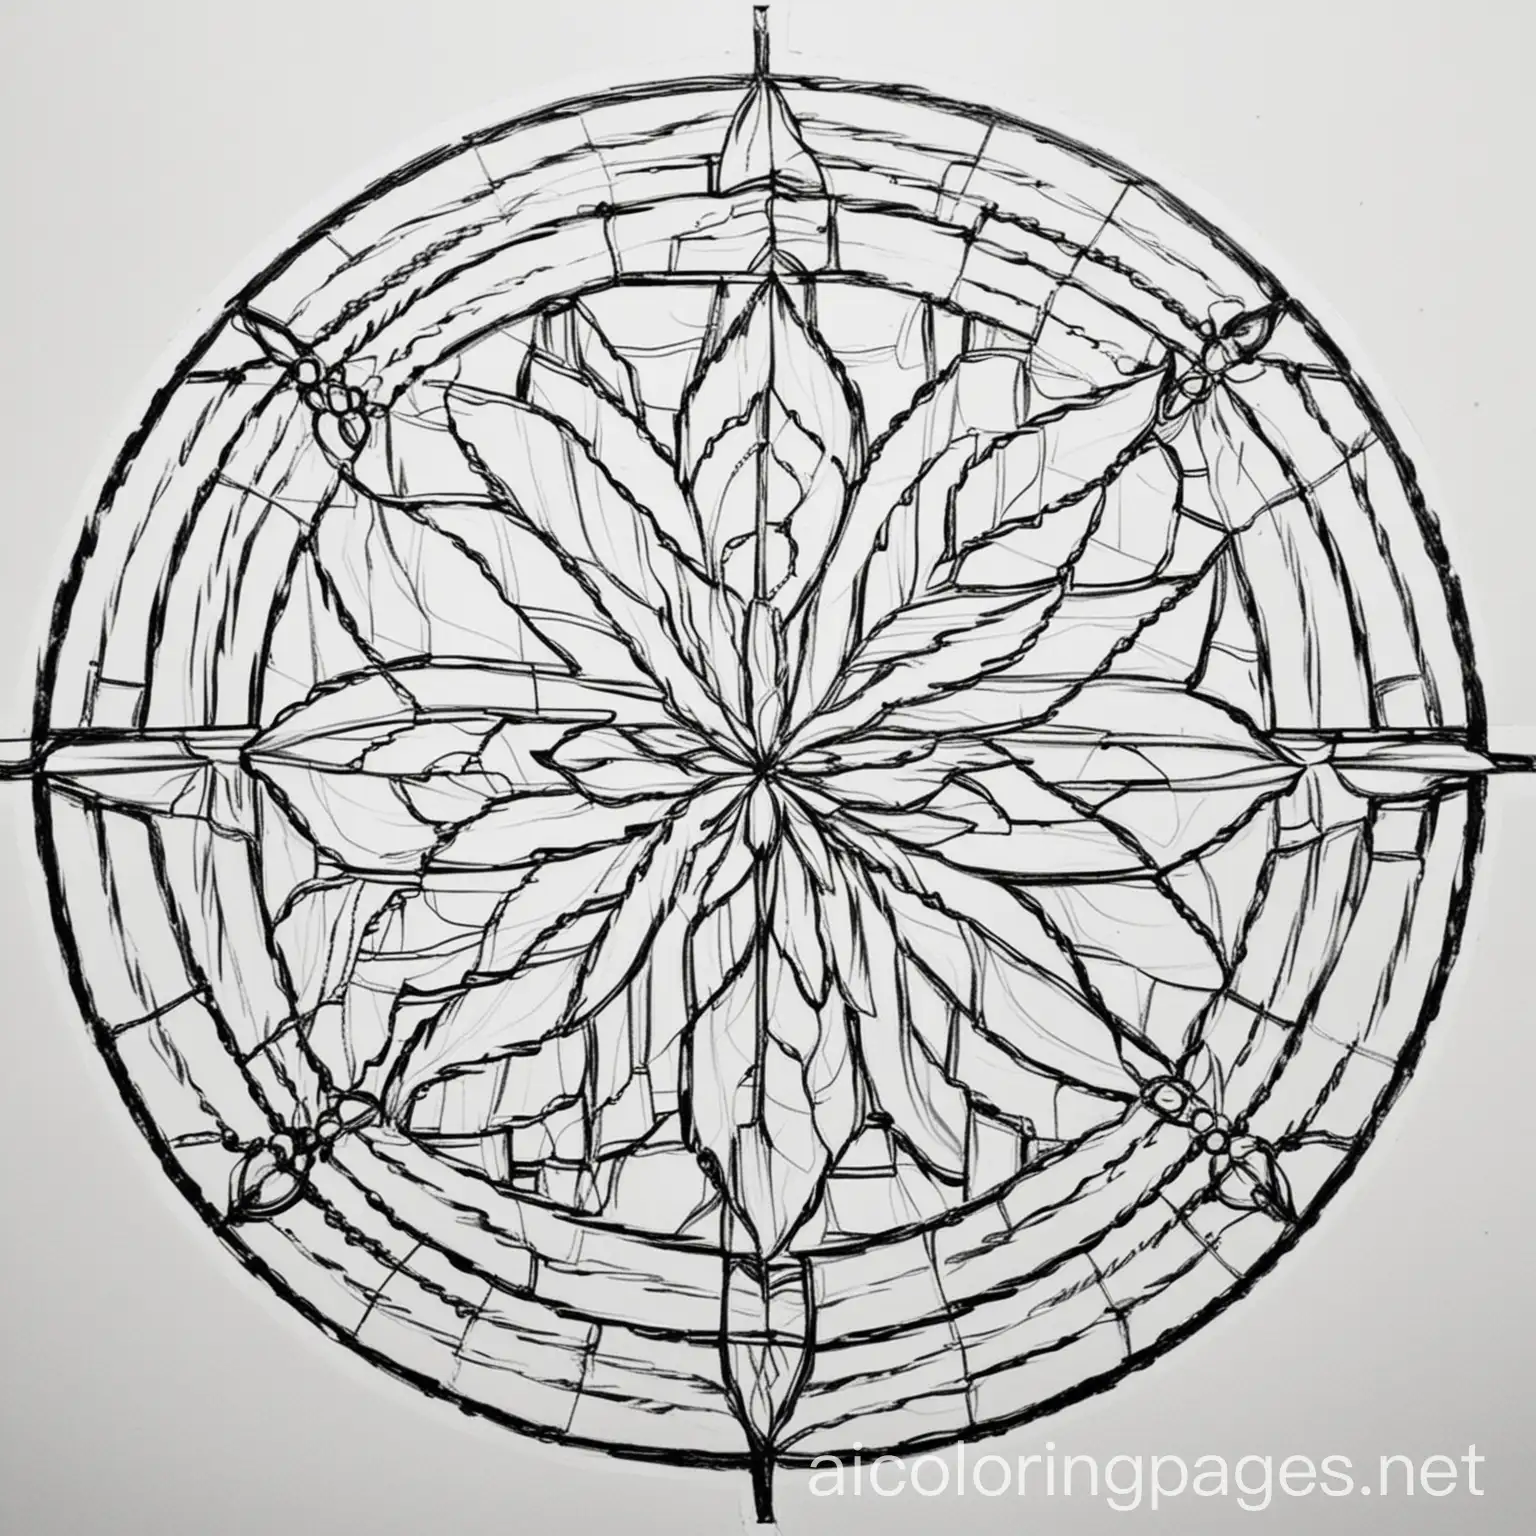 Stained-Glass-Inspired-Coloring-Page-Simple-Line-Art-on-White-Background